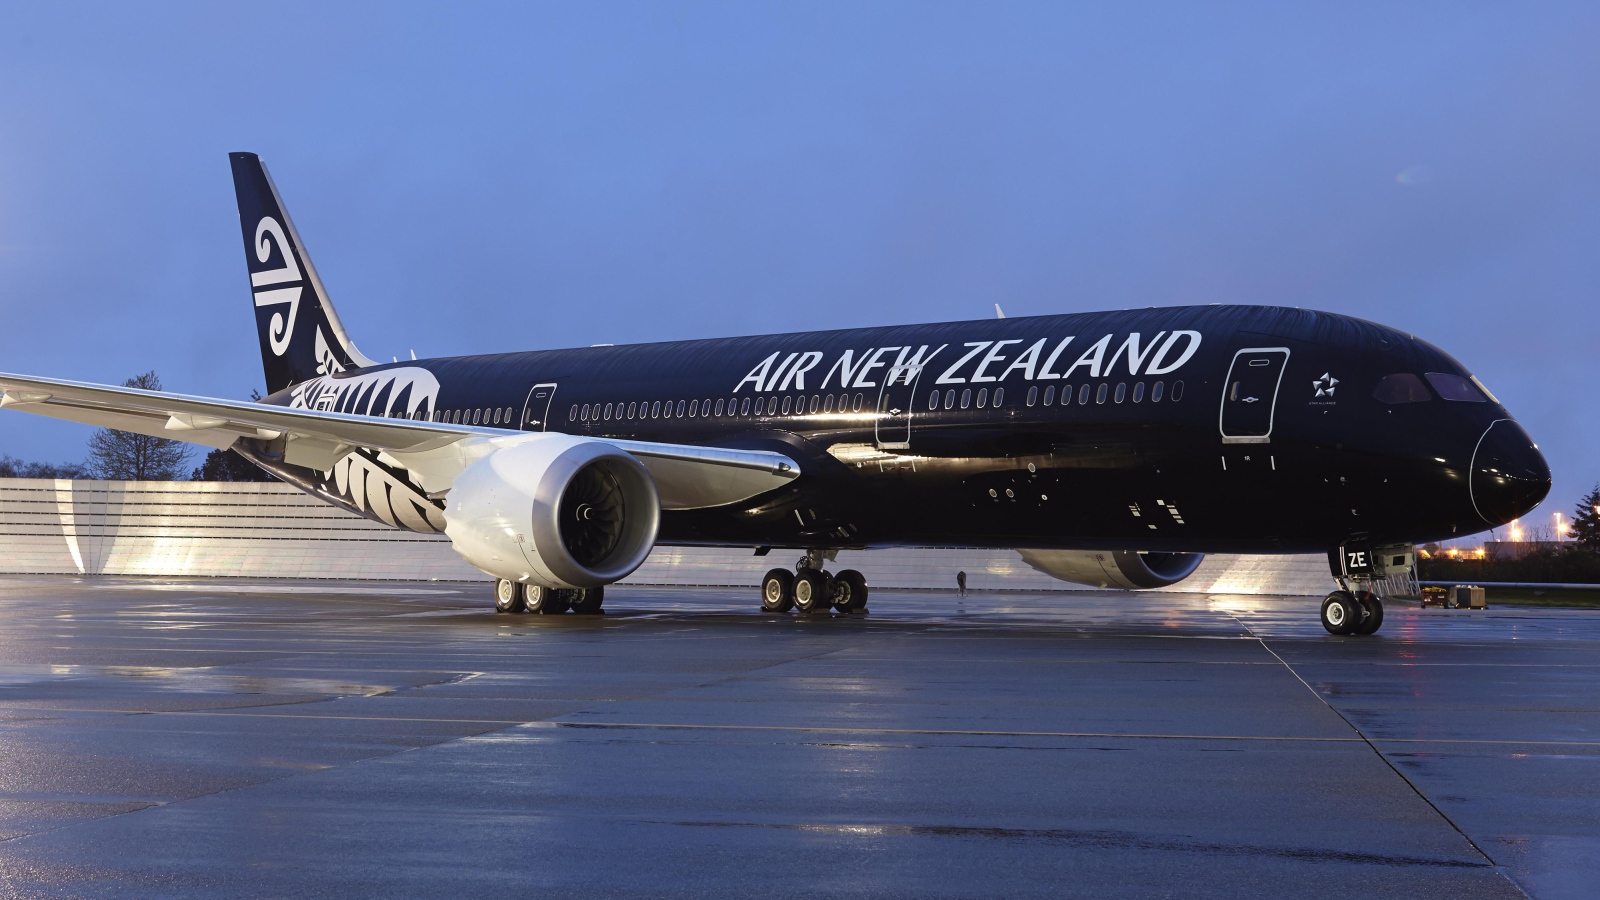 Air New Zealand plane at the airport